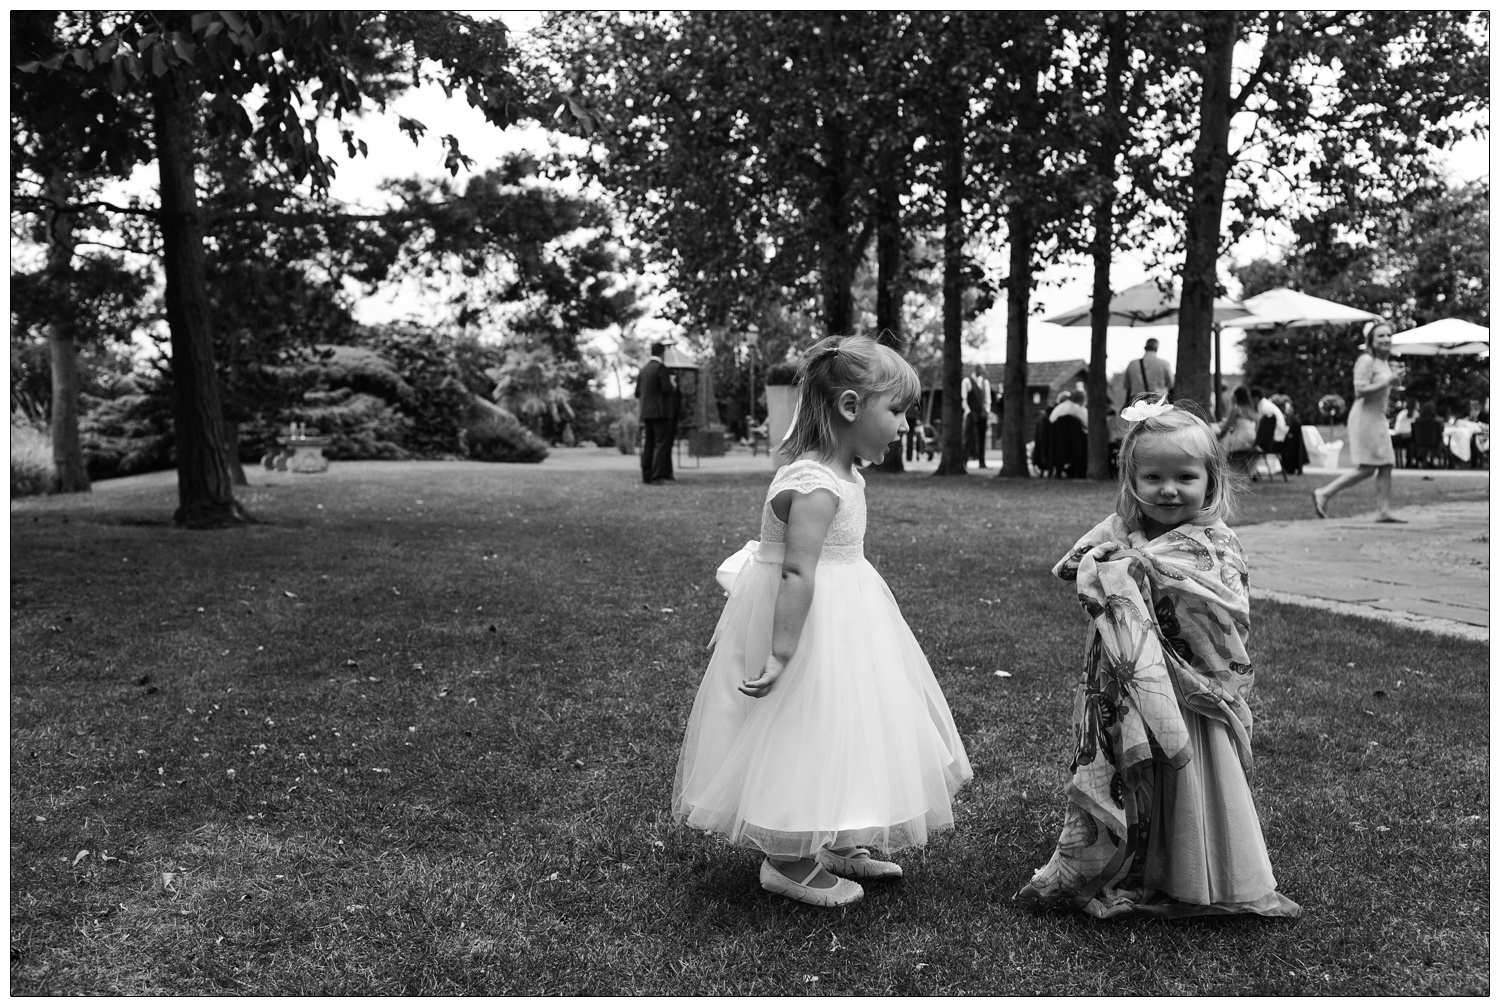 Two small girls in the grounds of Friern Manor. One girl is in a white dress, another is wrapped up in a scarf. There are trees in the background, and wedding guests drinking.